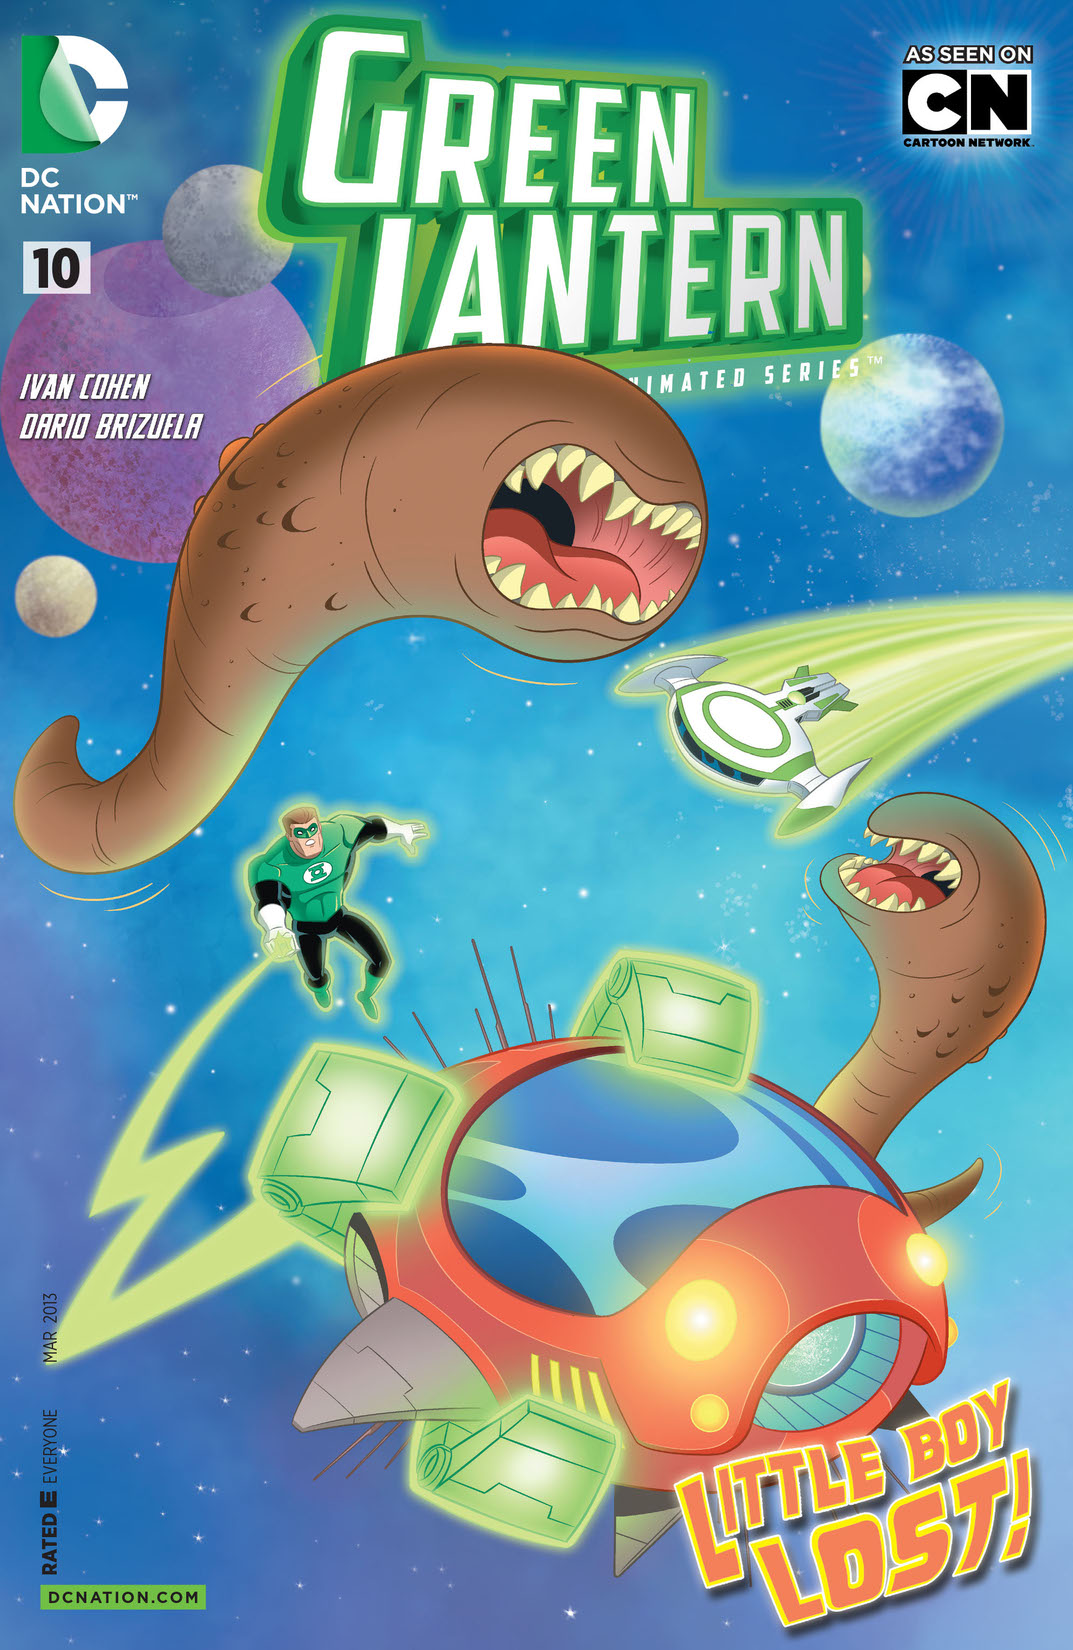 Green Lantern: The Animated Series #10 preview images